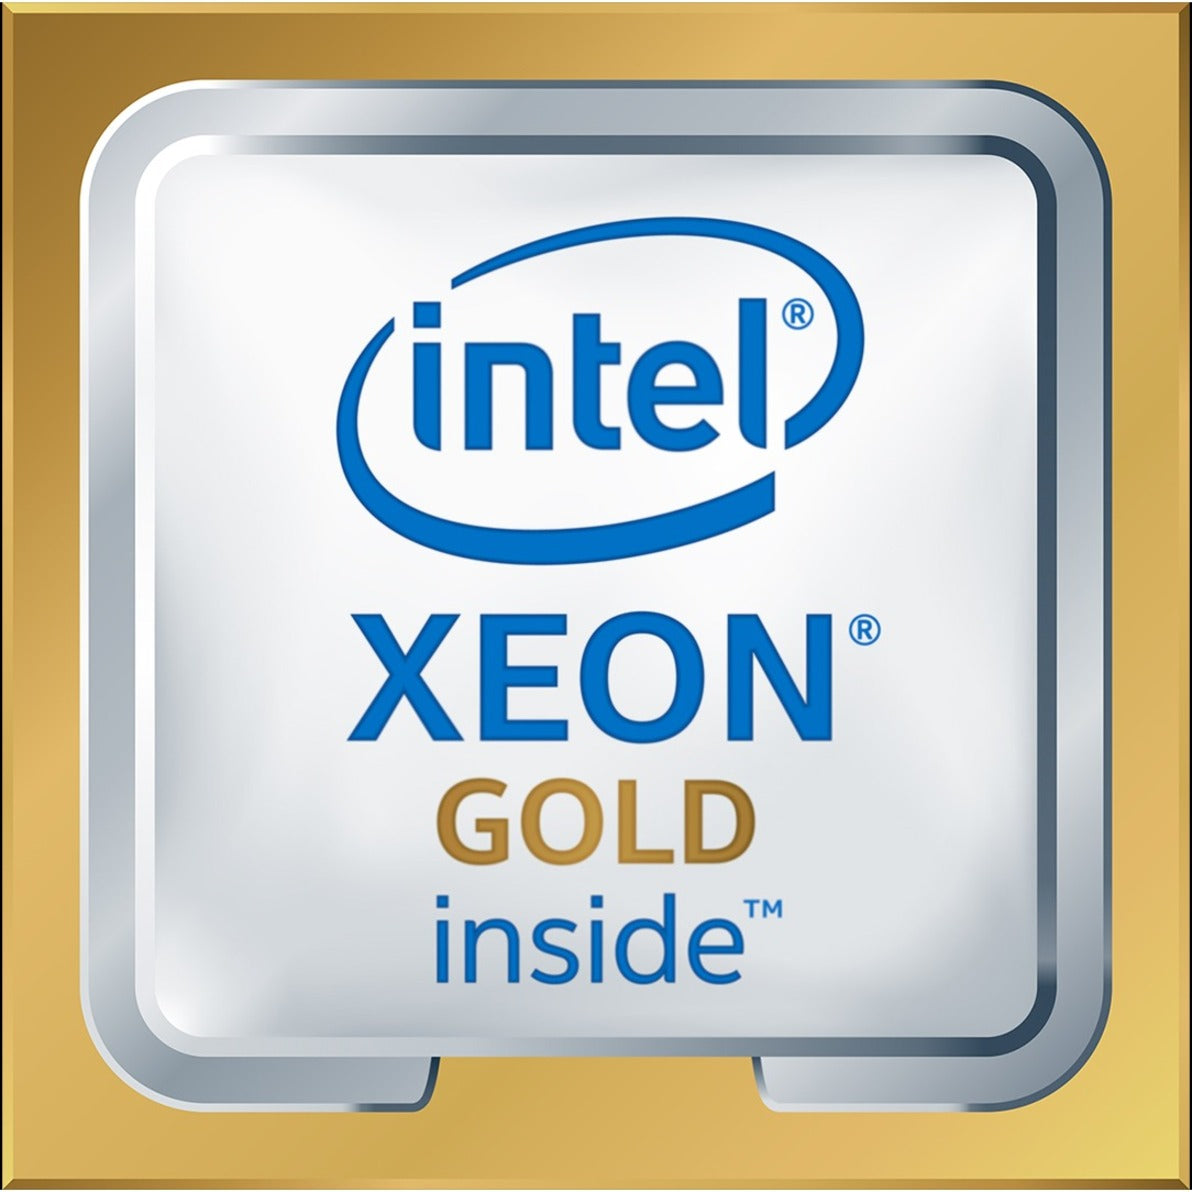 HPE P02499-B21 Xeon Gold 5220 Octadeca-core 2.20 GHz Server Processor Upgrade, 25MB L3 Cache, 125W TDP